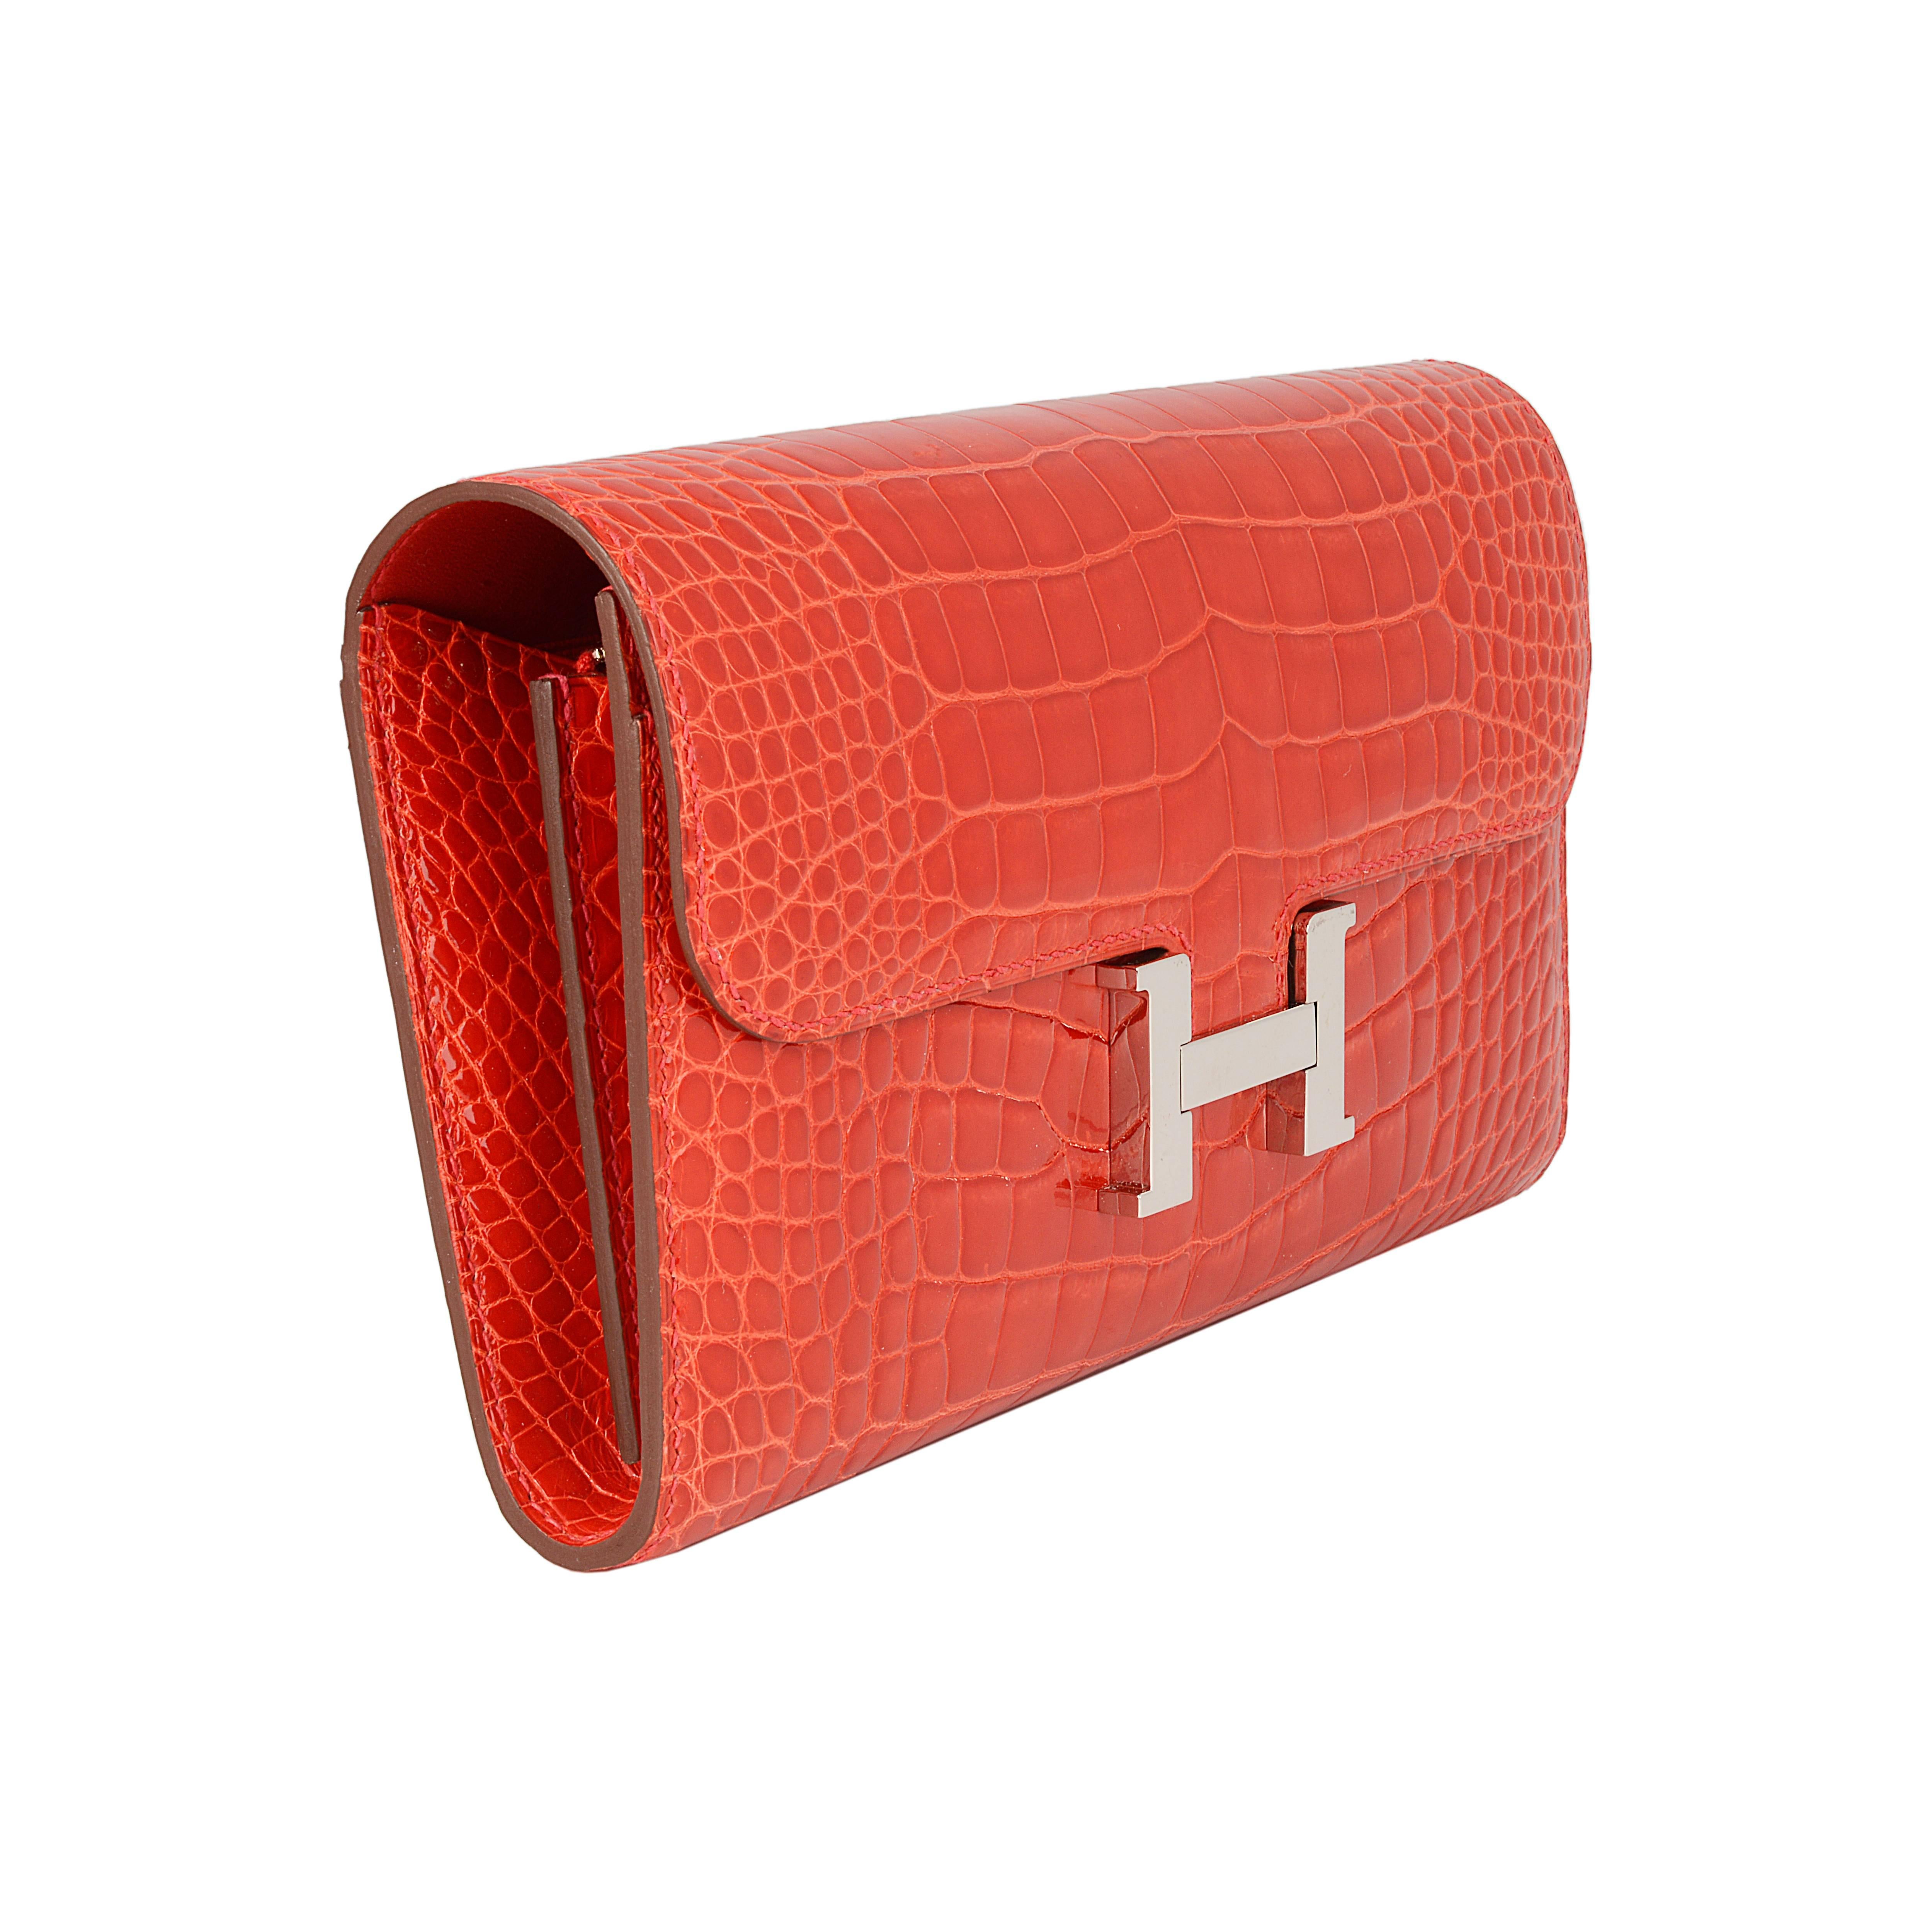 This Hermès Constance Long Wallet, which can also be worn as a clutch bag, is primarily made from red shiny alligator leather accentuated by palladium hardware and the iconic H clip. The interior is lined with red Epsom leather, has two front wall